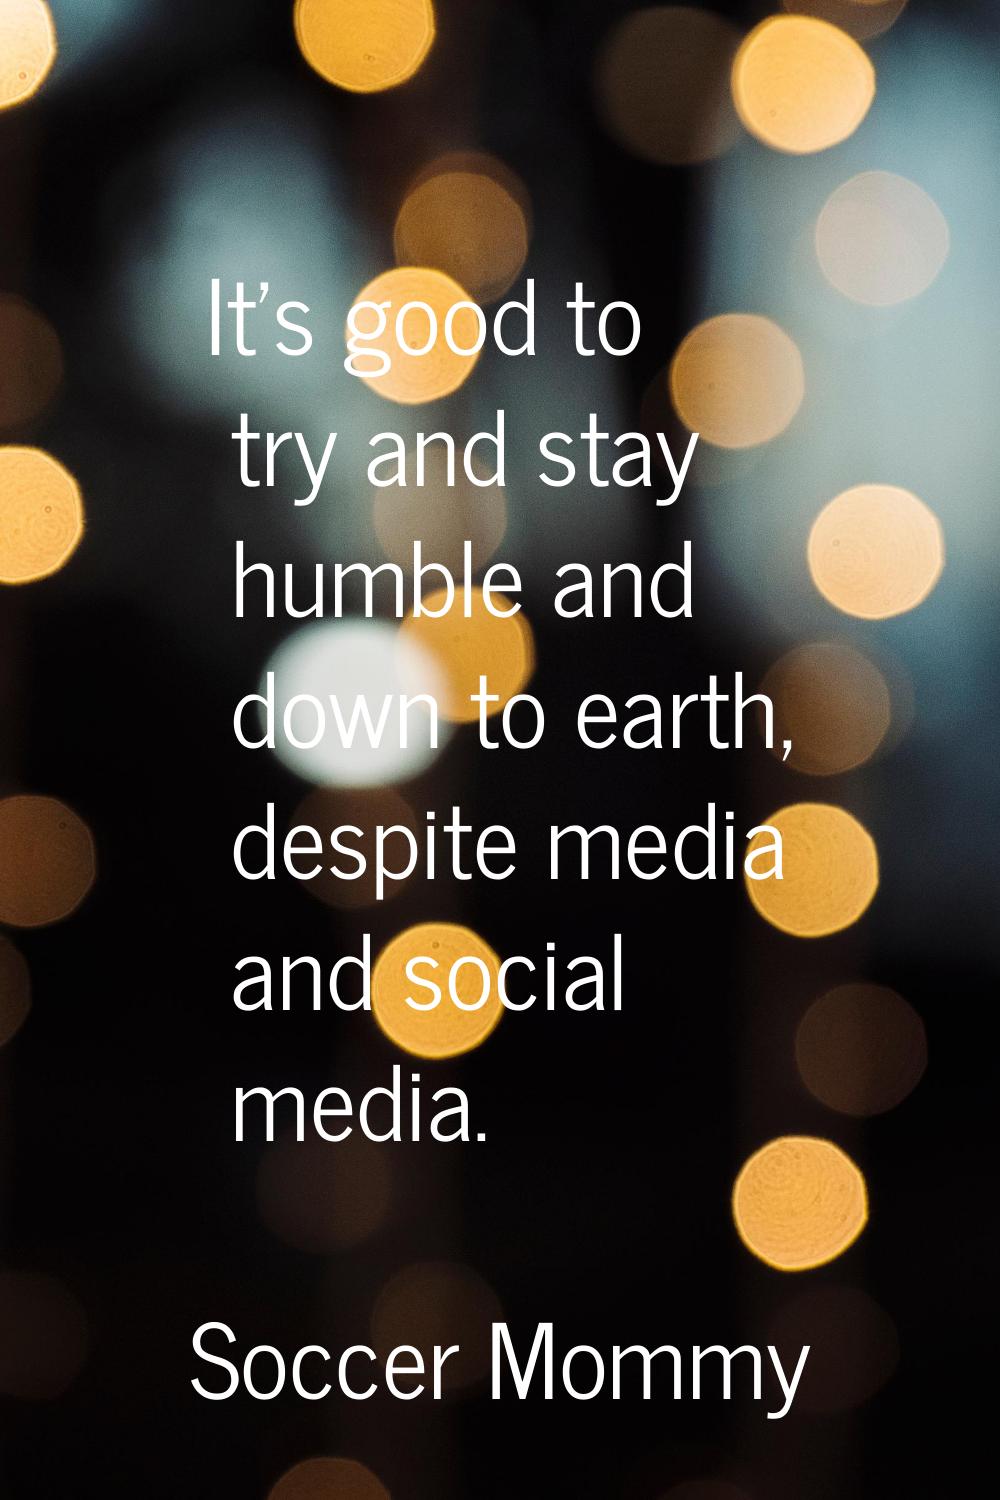 It's good to try and stay humble and down to earth, despite media and social media.